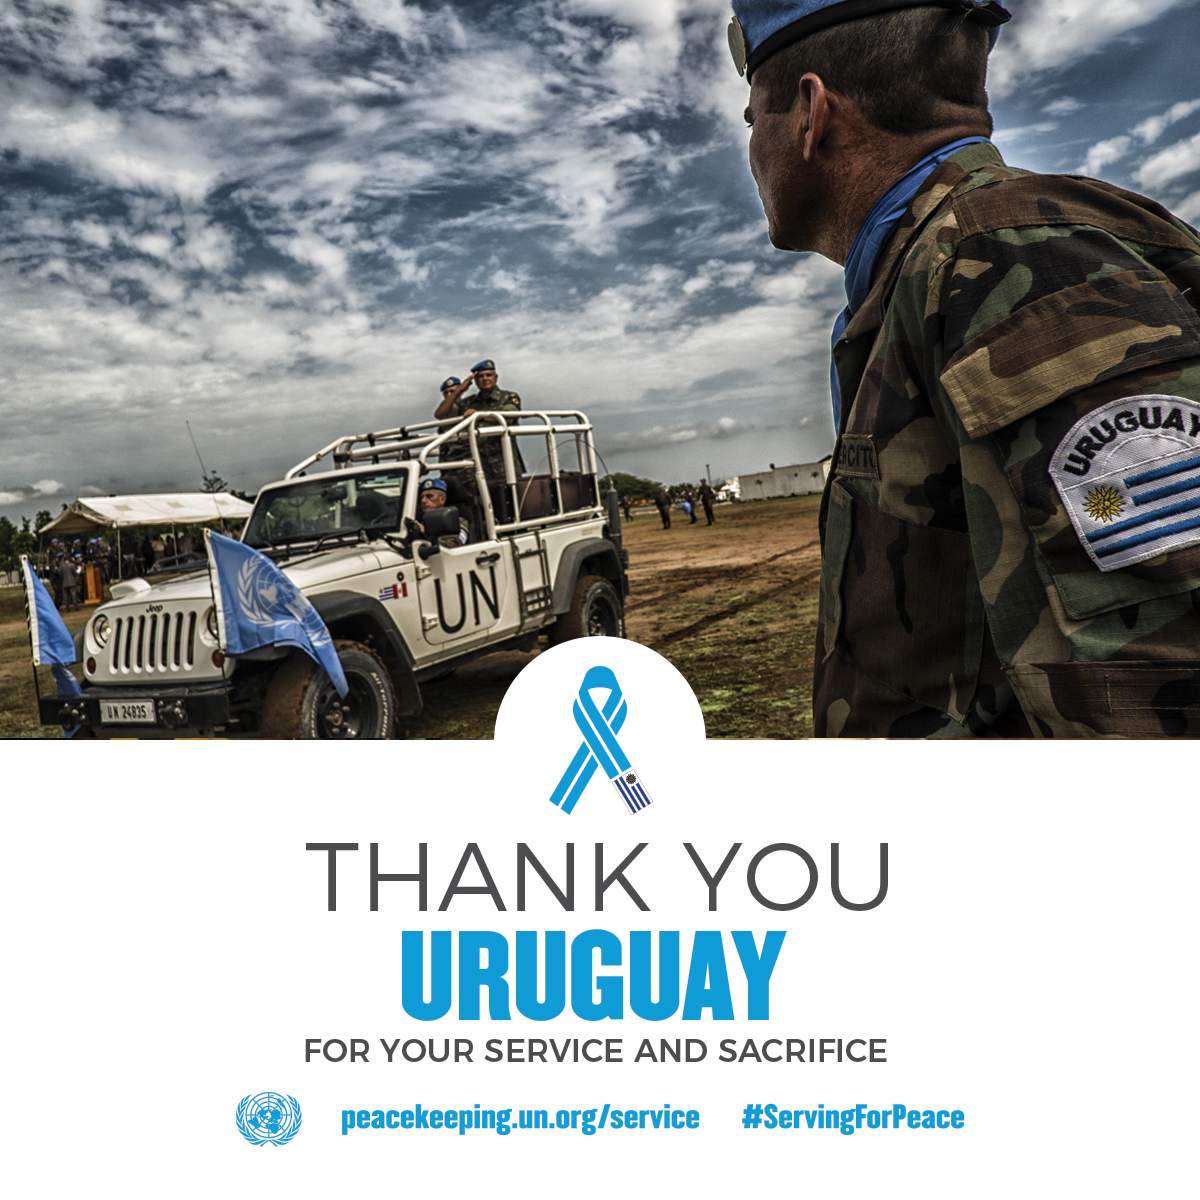 Thanks Uruguay for your service and sacrifice 